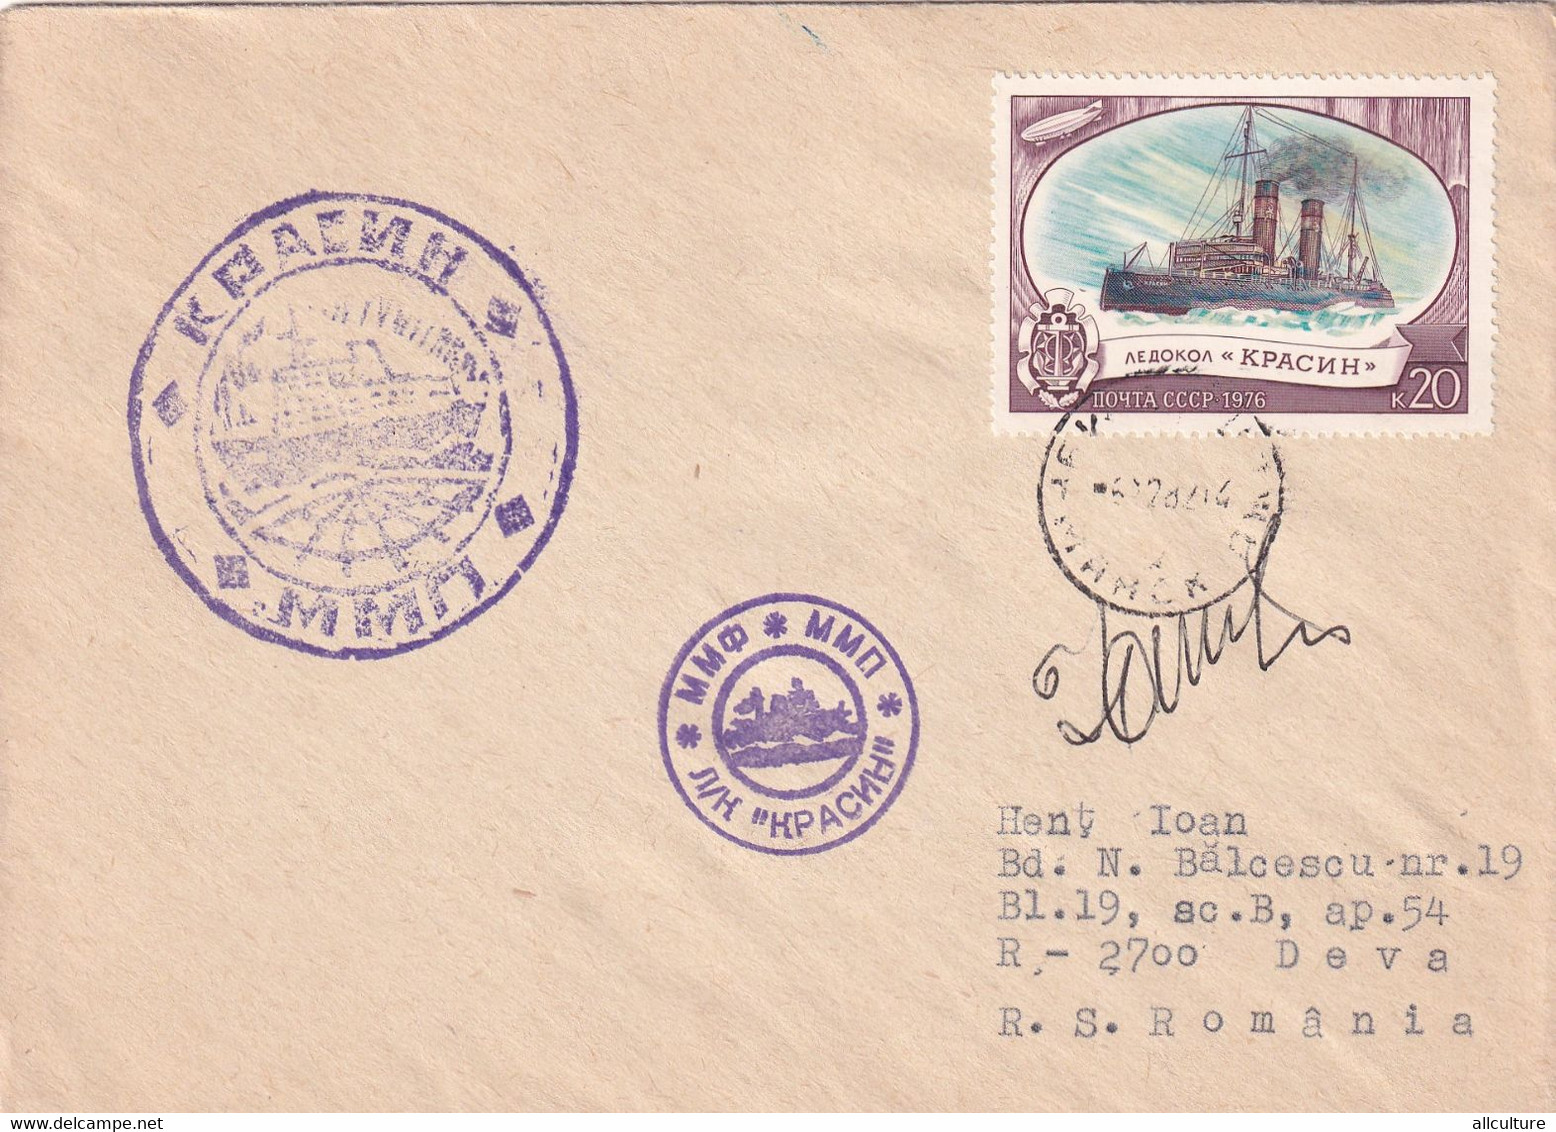 A8139- KRASIN ICEBREAKER SHIP, 1976 USSR MAIL USED STAMP ON COVER SENT TO DEVA ROMANIA - Barcos Polares Y Rompehielos